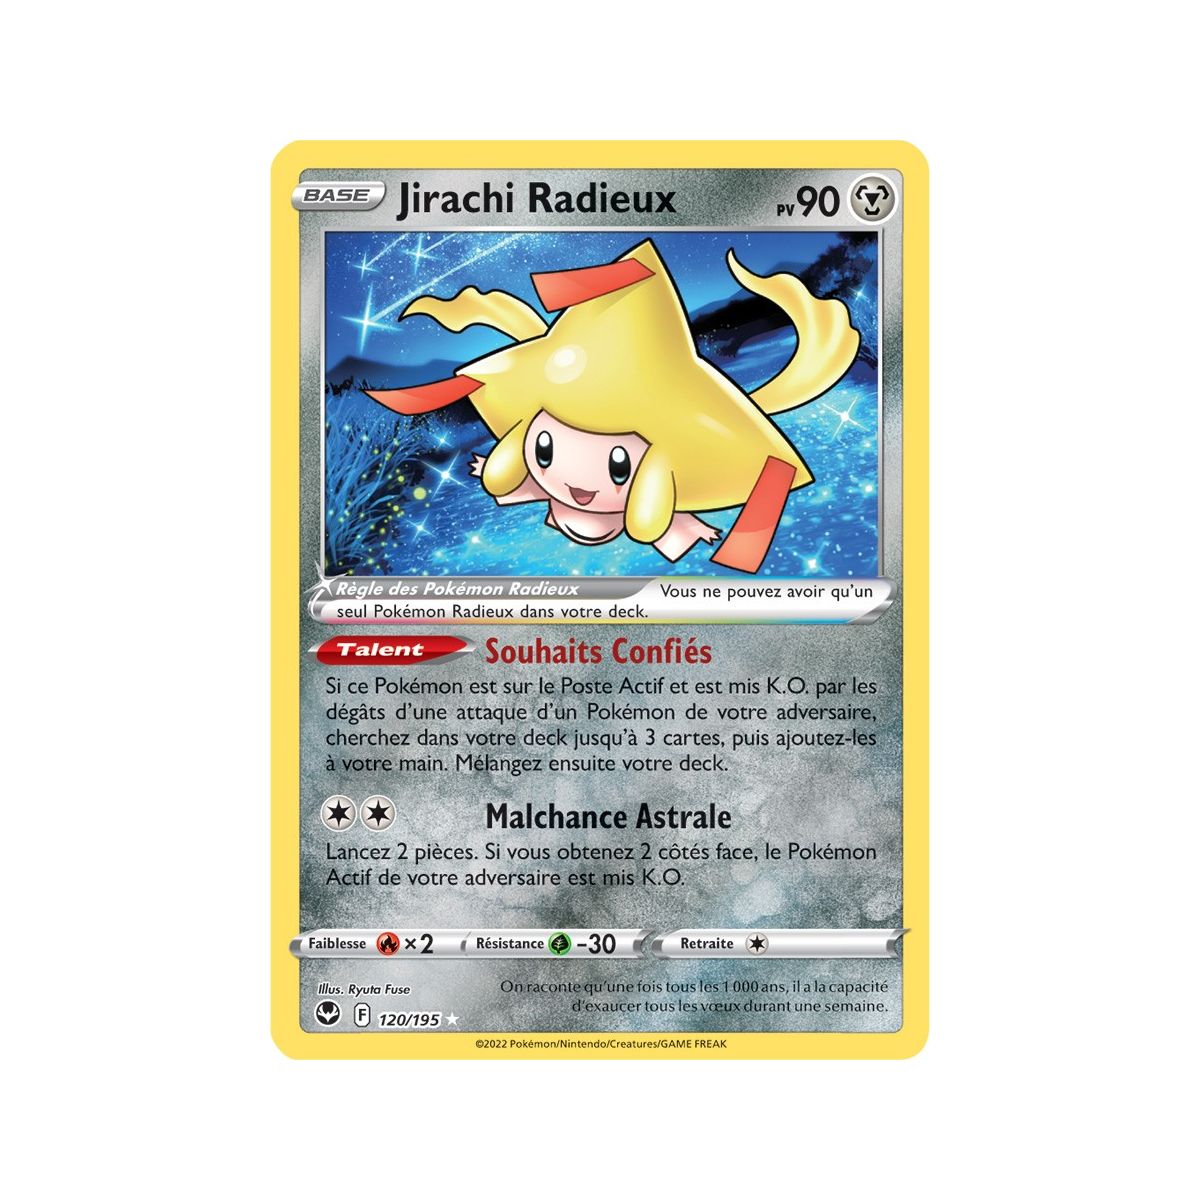 Radiant Jirachi - Radiant Rare 120/195 - Sword and Shield 12 Silver Storm